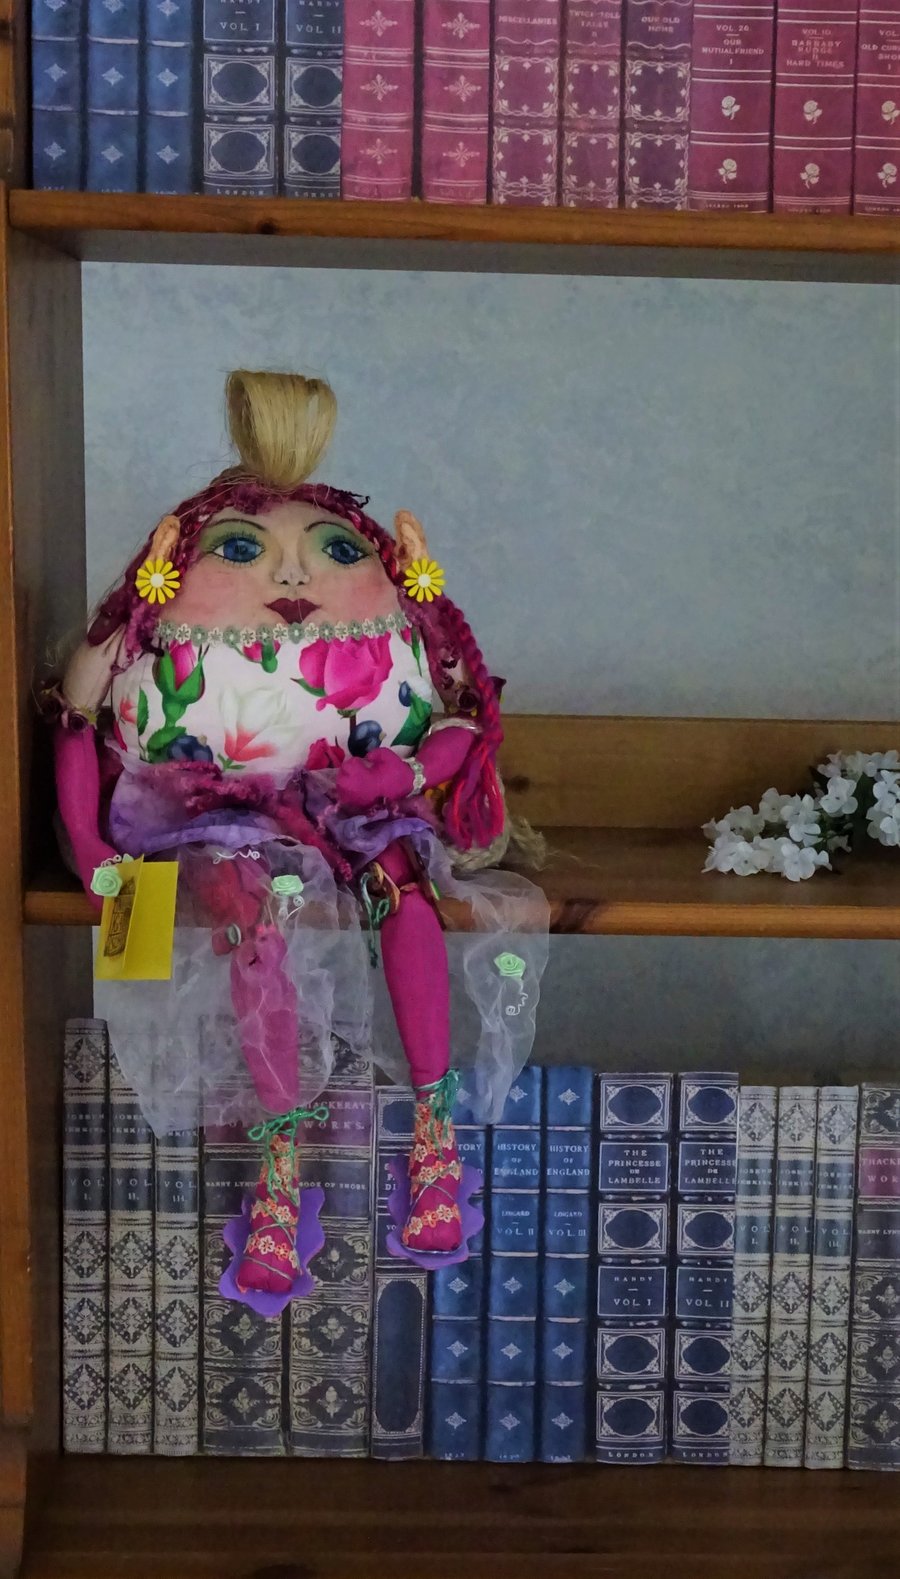 Art doll – handcrafted, collectable, unique, gardener's keepsake - Pinky Rose